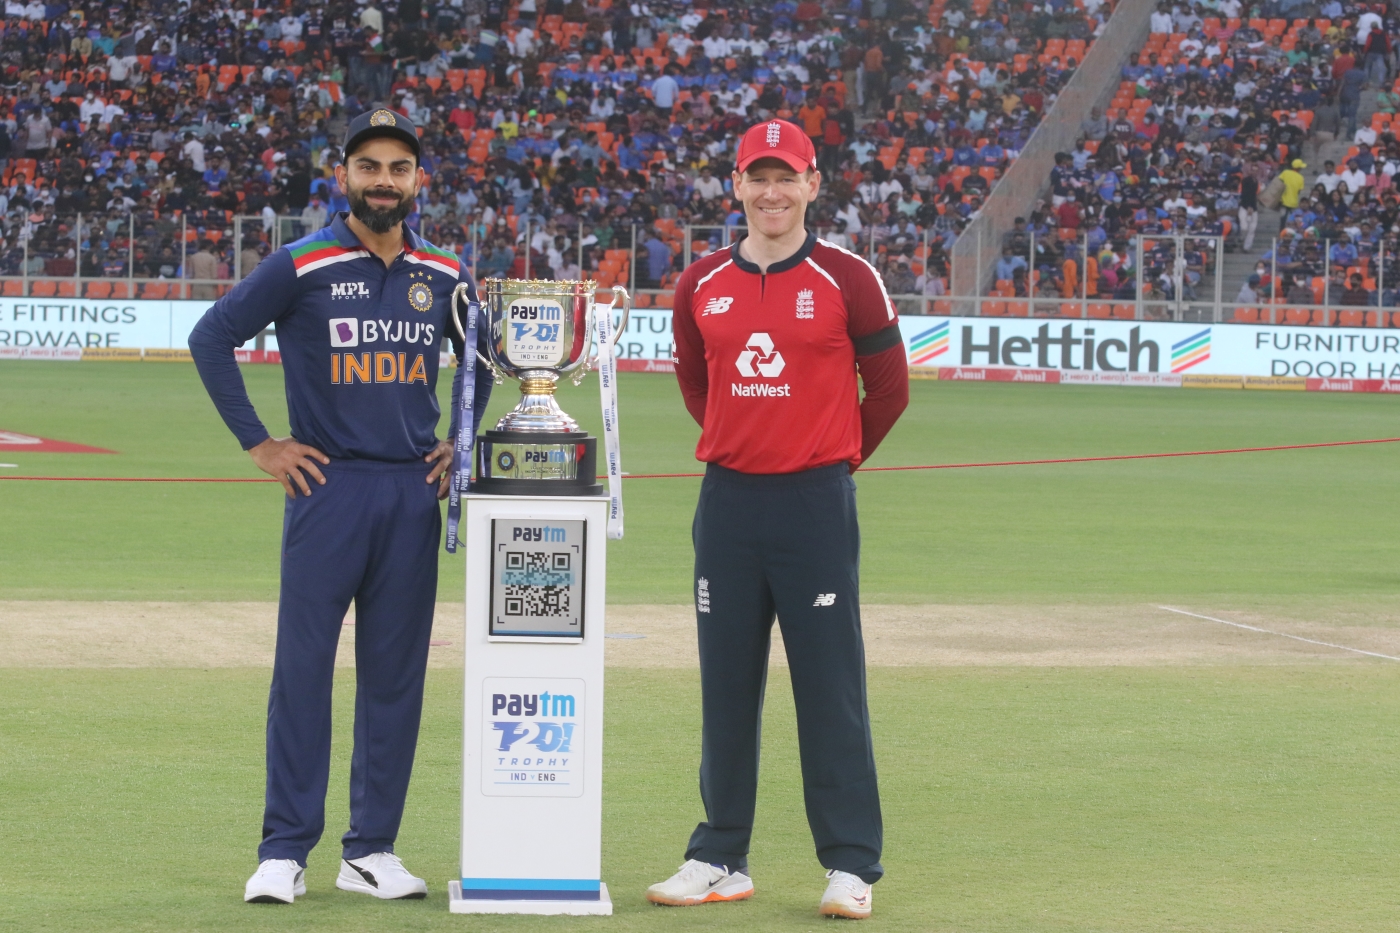 Both Kohli and Morgan have led their team to victories after winning the toss in this series | BCCI